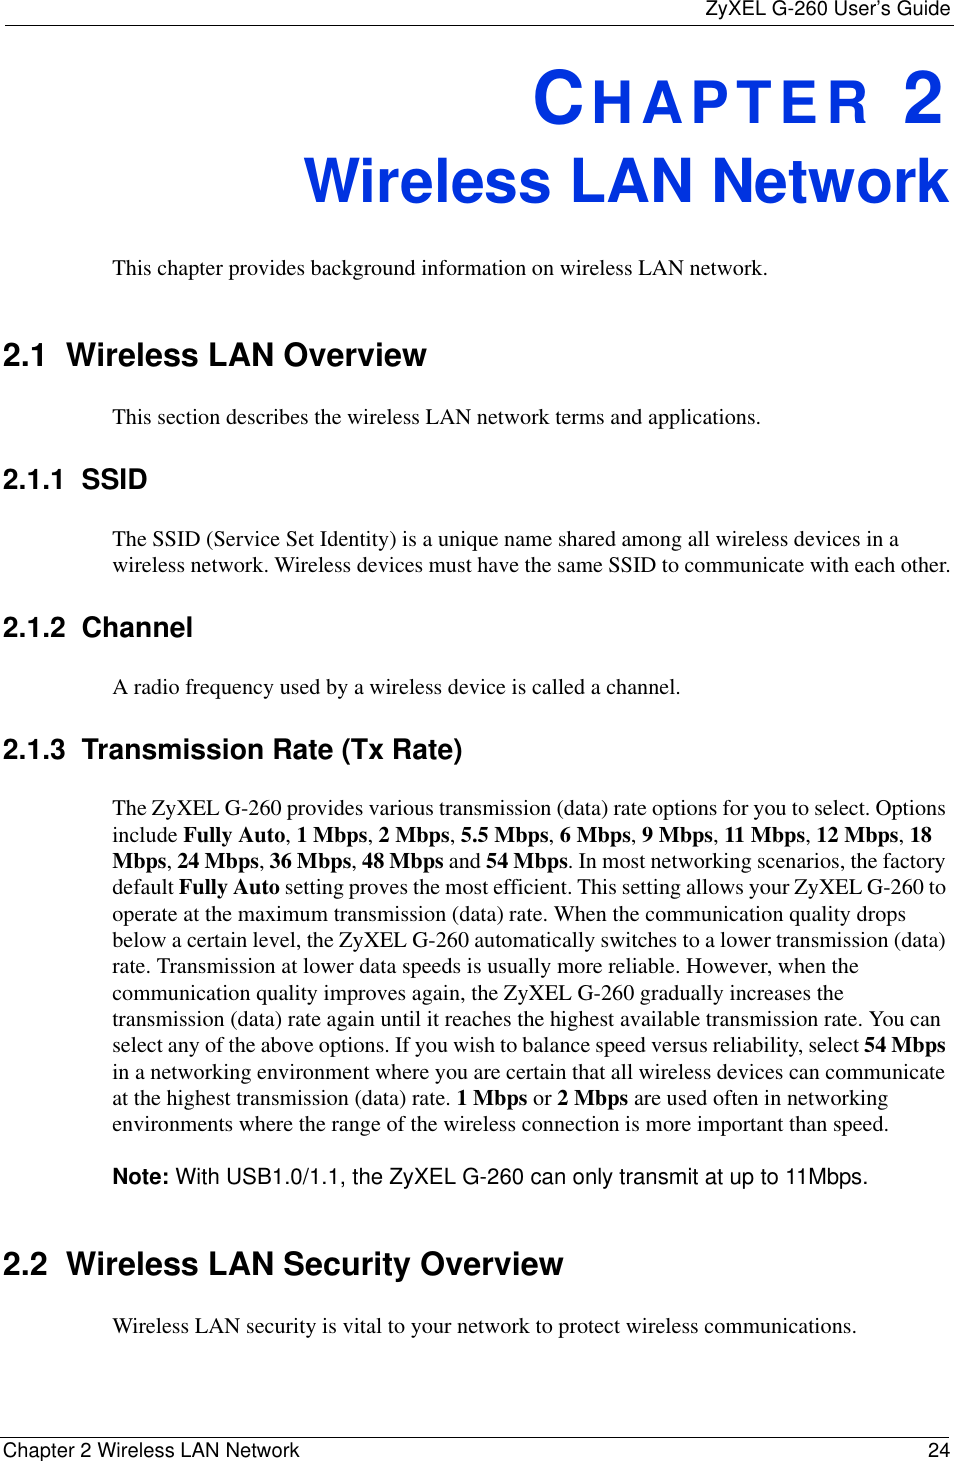 ZyXEL G-260 User’s GuideChapter 2 Wireless LAN Network 24CHAPTER 2Wireless LAN NetworkThis chapter provides background information on wireless LAN network.2.1  Wireless LAN Overview This section describes the wireless LAN network terms and applications.2.1.1  SSIDThe SSID (Service Set Identity) is a unique name shared among all wireless devices in a wireless network. Wireless devices must have the same SSID to communicate with each other.2.1.2  ChannelA radio frequency used by a wireless device is called a channel.2.1.3  Transmission Rate (Tx Rate)The ZyXEL G-260 provides various transmission (data) rate options for you to select. Options include Fully Auto,1 Mbps,2 Mbps,5.5 Mbps,6 Mbps,9 Mbps,11 Mbps, 12 Mbps,18 Mbps,24 Mbps,36 Mbps,48 Mbps and 54 Mbps. In most networking scenarios, the factory default Fully Auto setting proves the most efficient. This setting allows your ZyXEL G-260 to operate at the maximum transmission (data) rate. When the communication quality drops below a certain level, the ZyXEL G-260 automatically switches to a lower transmission (data) rate. Transmission at lower data speeds is usually more reliable. However, when the communication quality improves again, the ZyXEL G-260 gradually increases the transmission (data) rate again until it reaches the highest available transmission rate. You can select any of the above options. If you wish to balance speed versus reliability, select 54 Mbpsin a networking environment where you are certain that all wireless devices can communicate at the highest transmission (data) rate. 1 Mbps or 2 Mbps are used often in networking environments where the range of the wireless connection is more important than speed. Note: With USB1.0/1.1, the ZyXEL G-260 can only transmit at up to 11Mbps.2.2  Wireless LAN Security Overview Wireless LAN security is vital to your network to protect wireless communications.